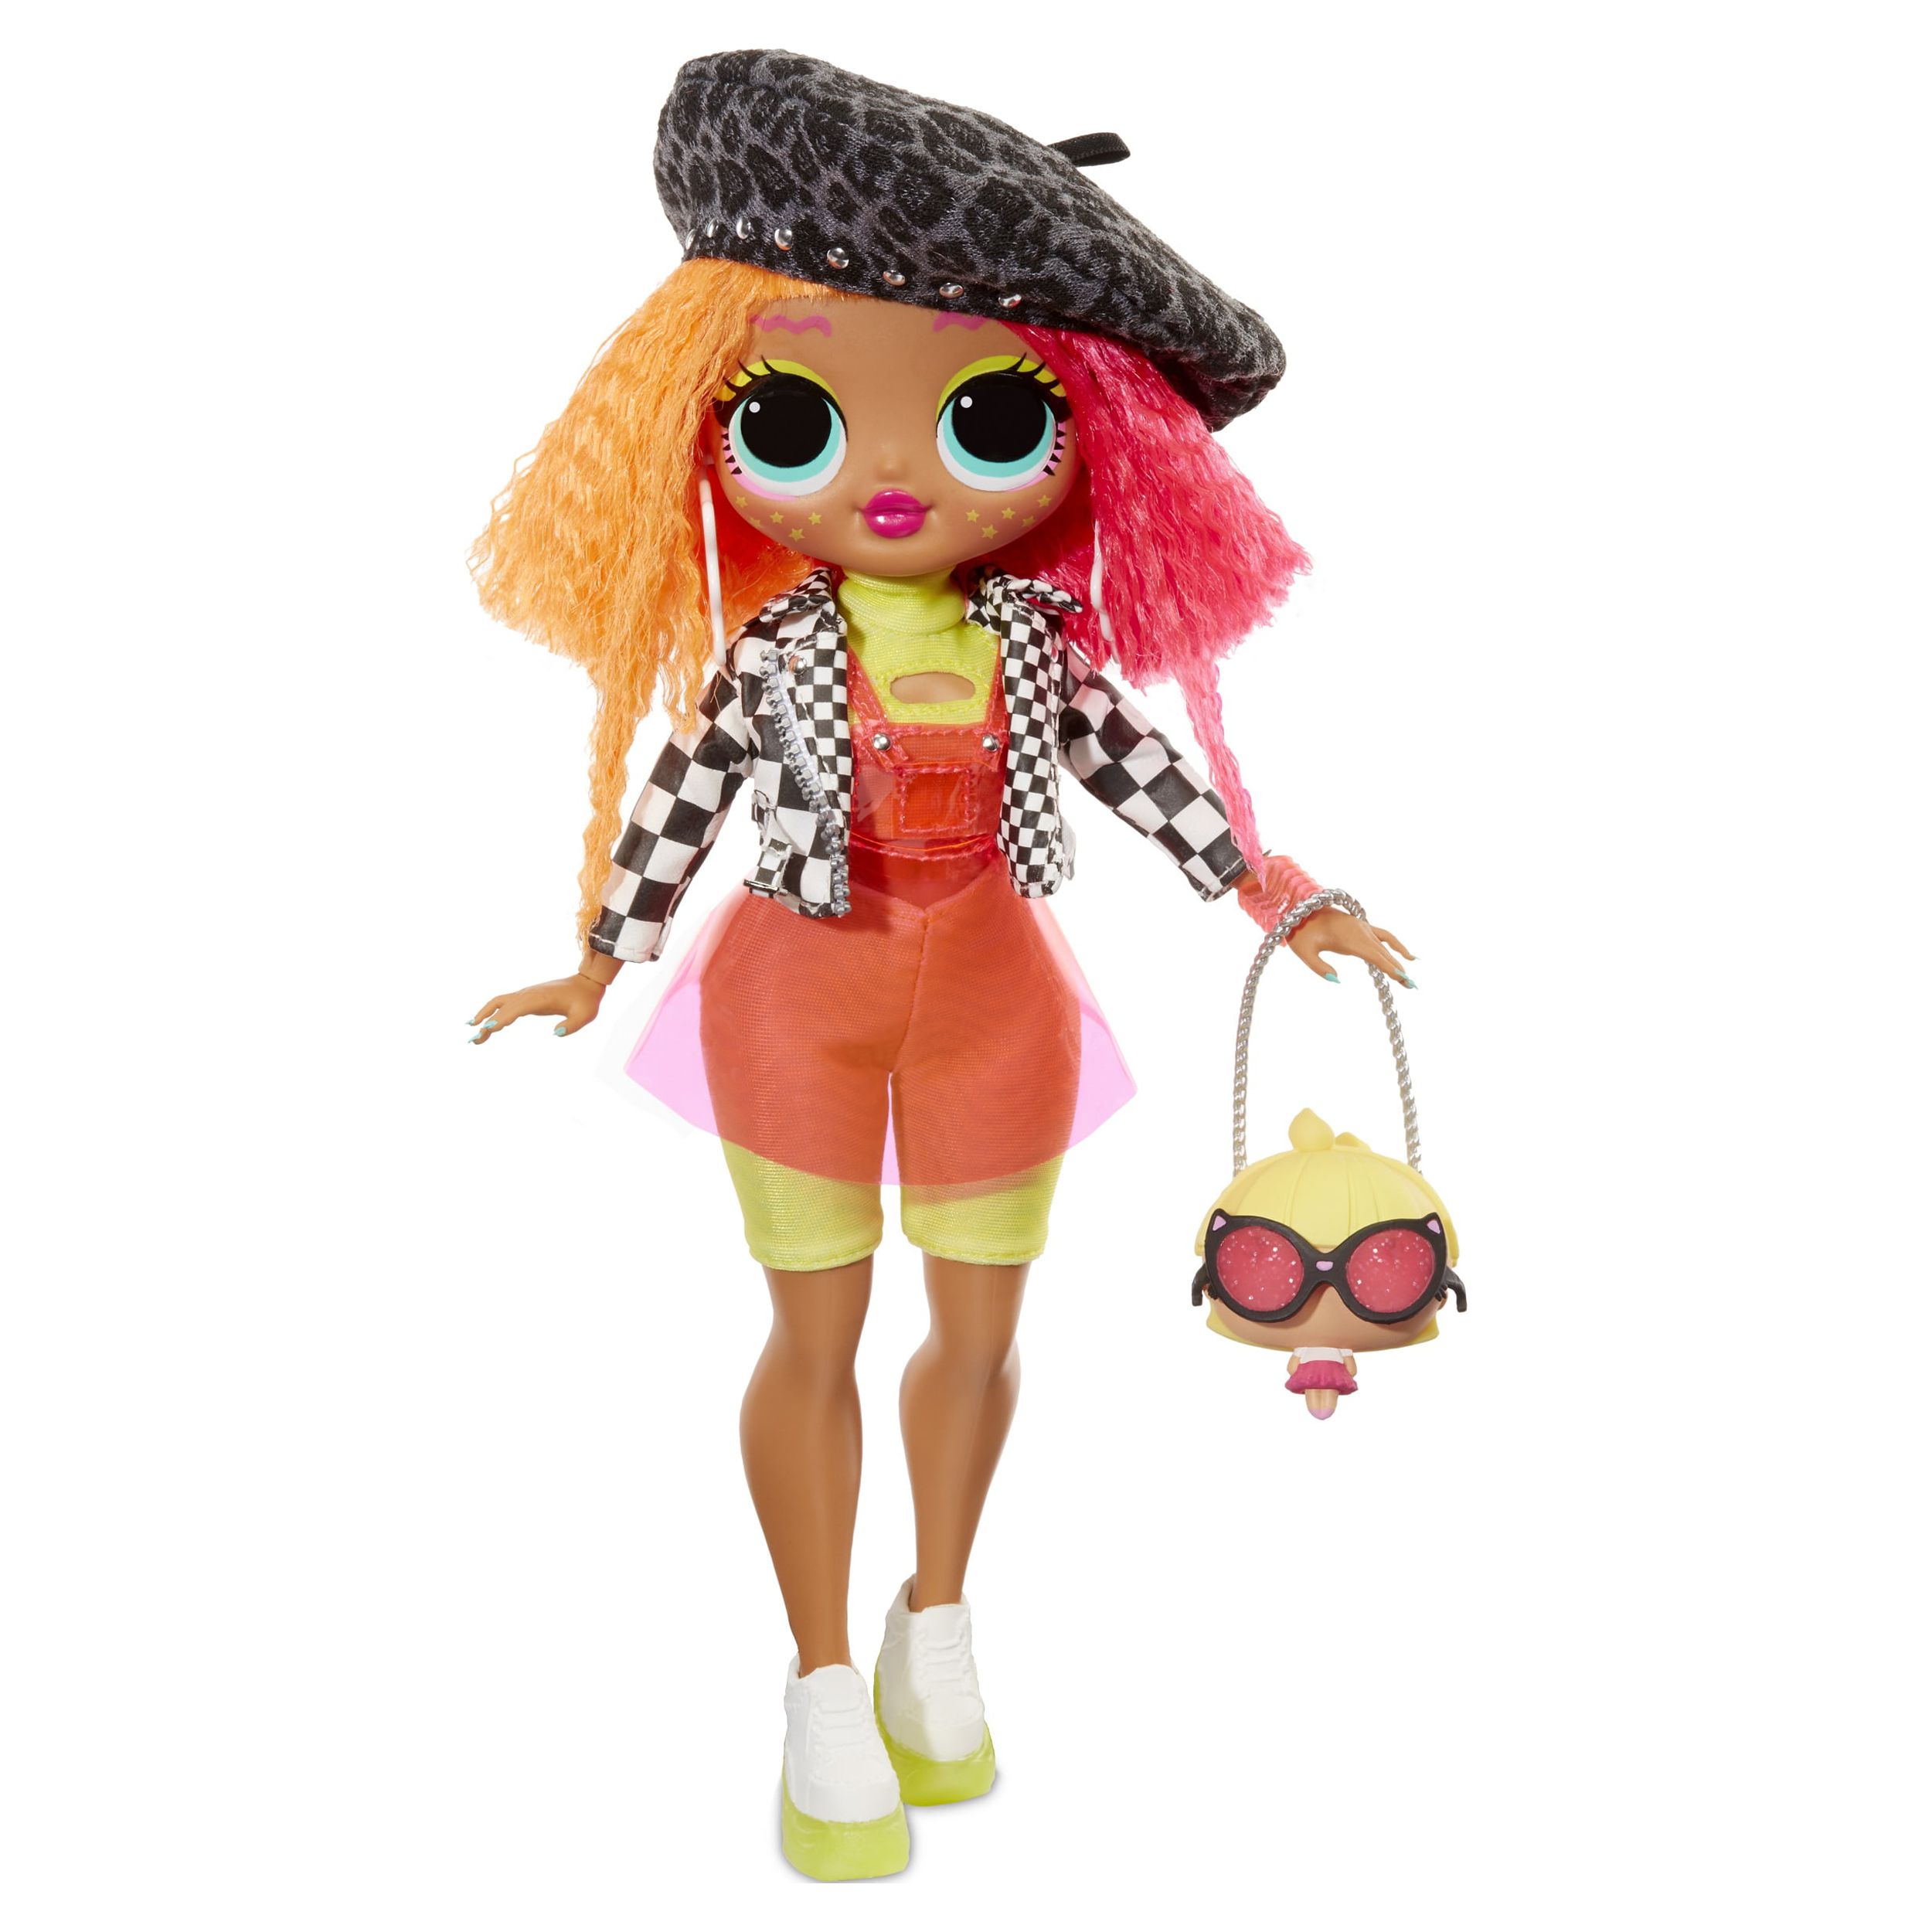 LOL Surprise OMG Neonlicious Fashion Doll With 20 Surprises, Great Gift for Kids Ages 4 5 6+ - image 1 of 7